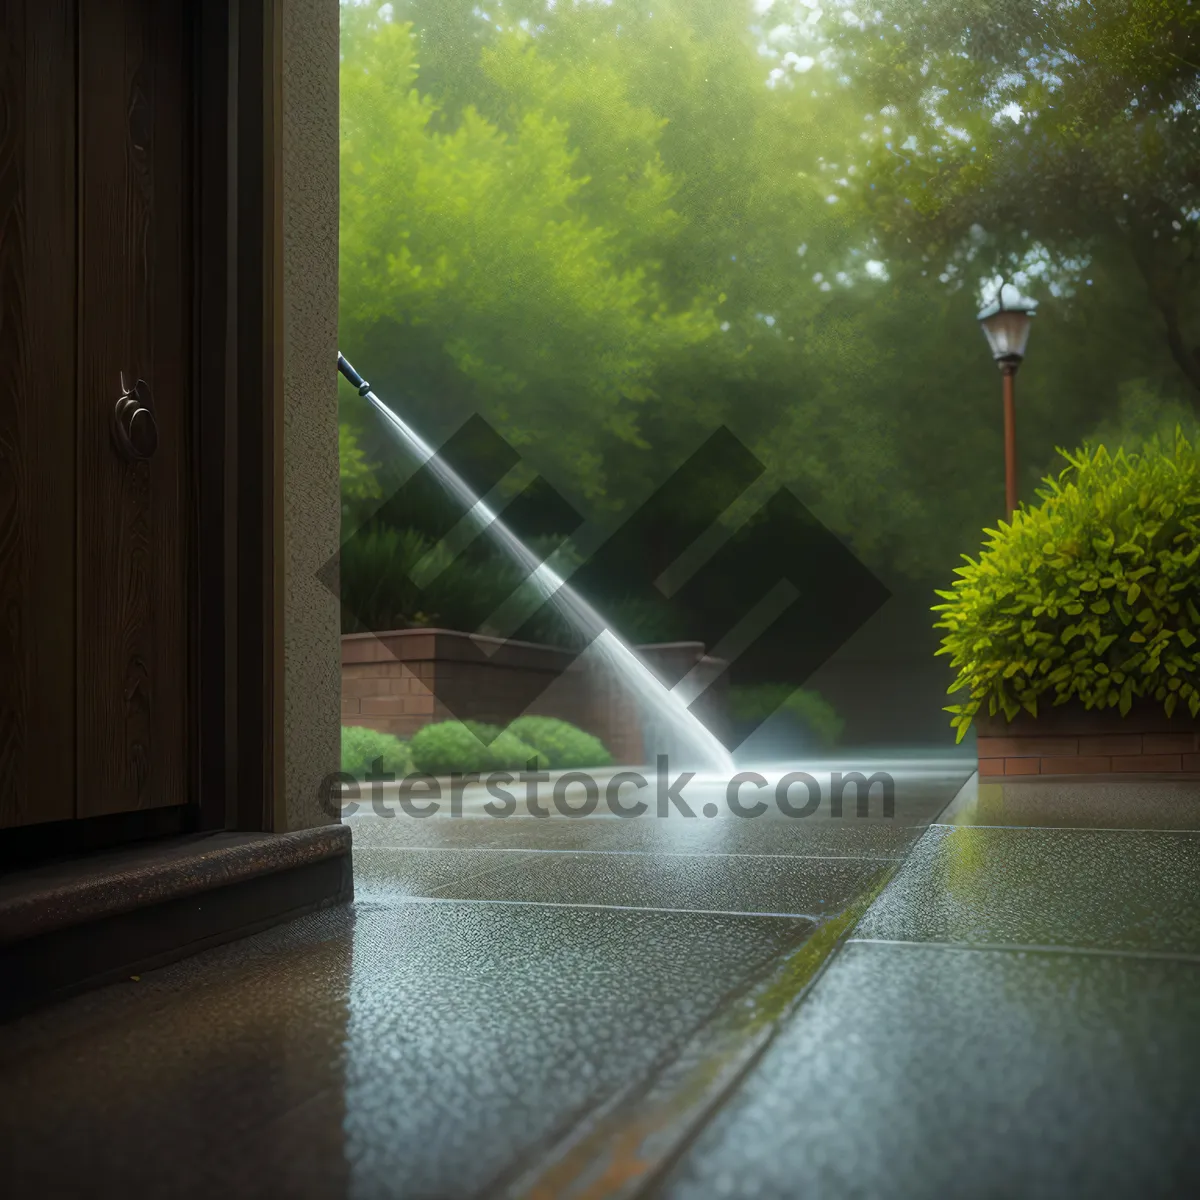 Picture of Summer Water Fountain on Windowsill